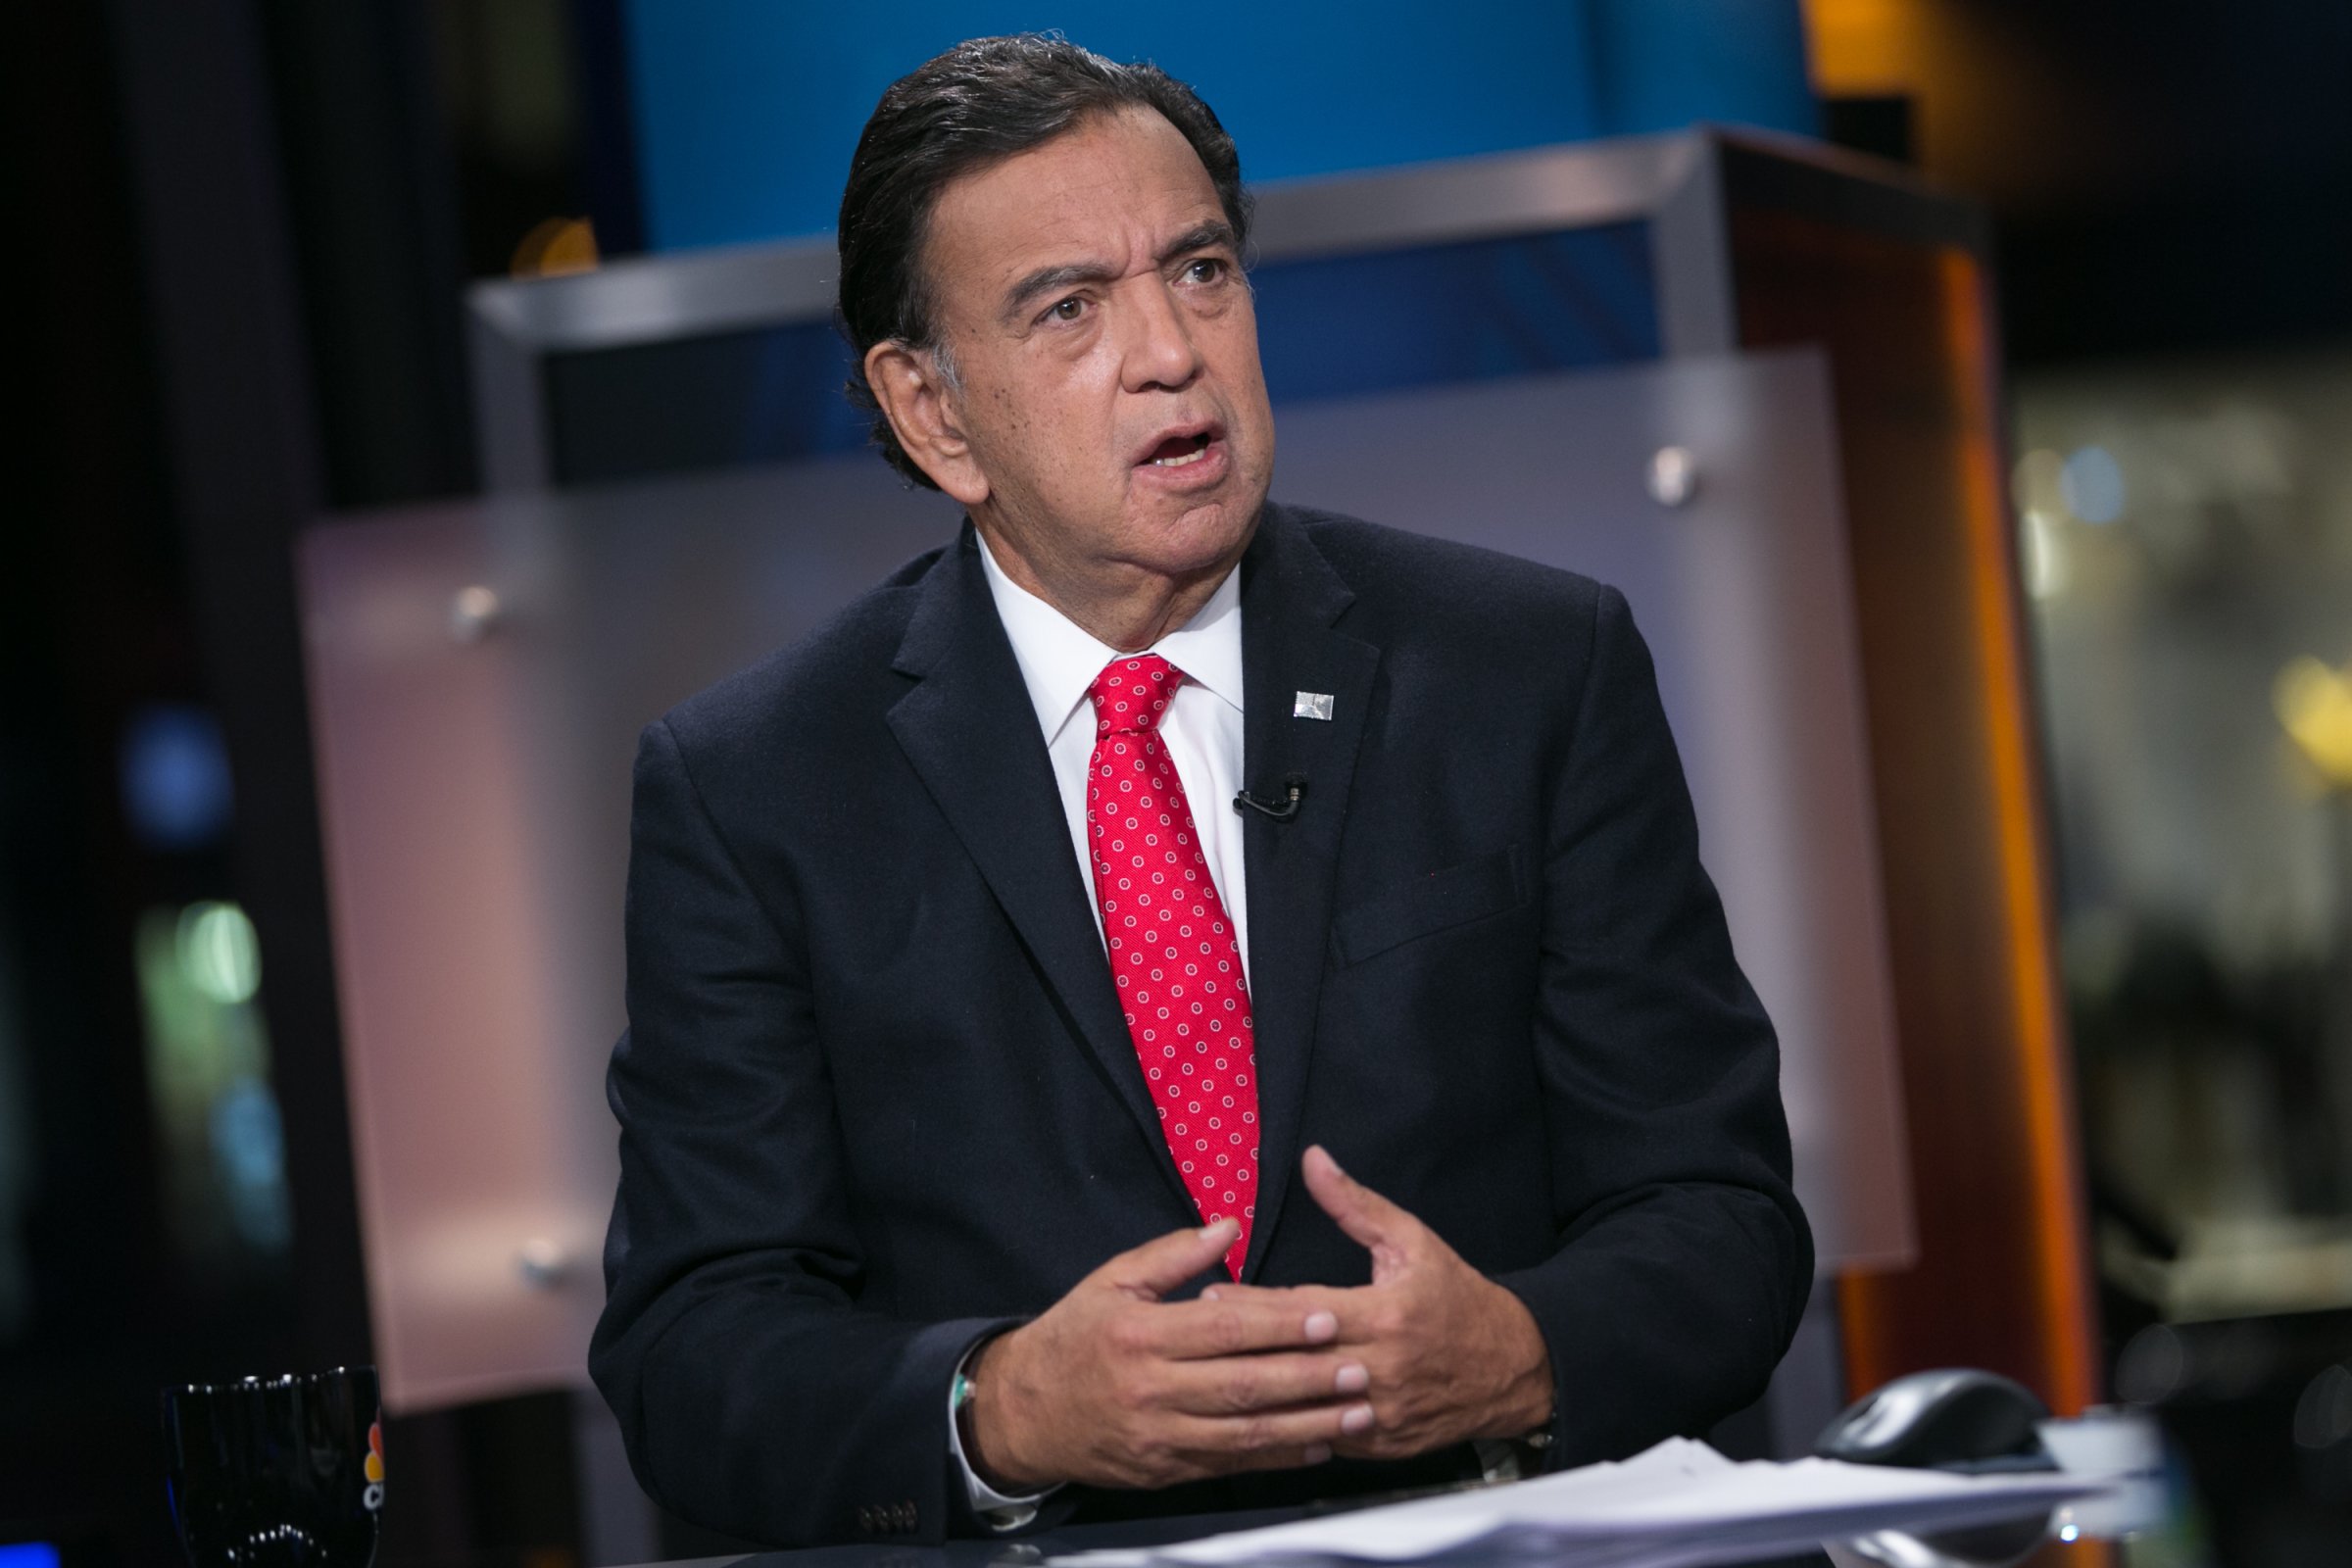 Bill Richardson, former Governor of New Mexico, in an interview on Jan.13, 2015.